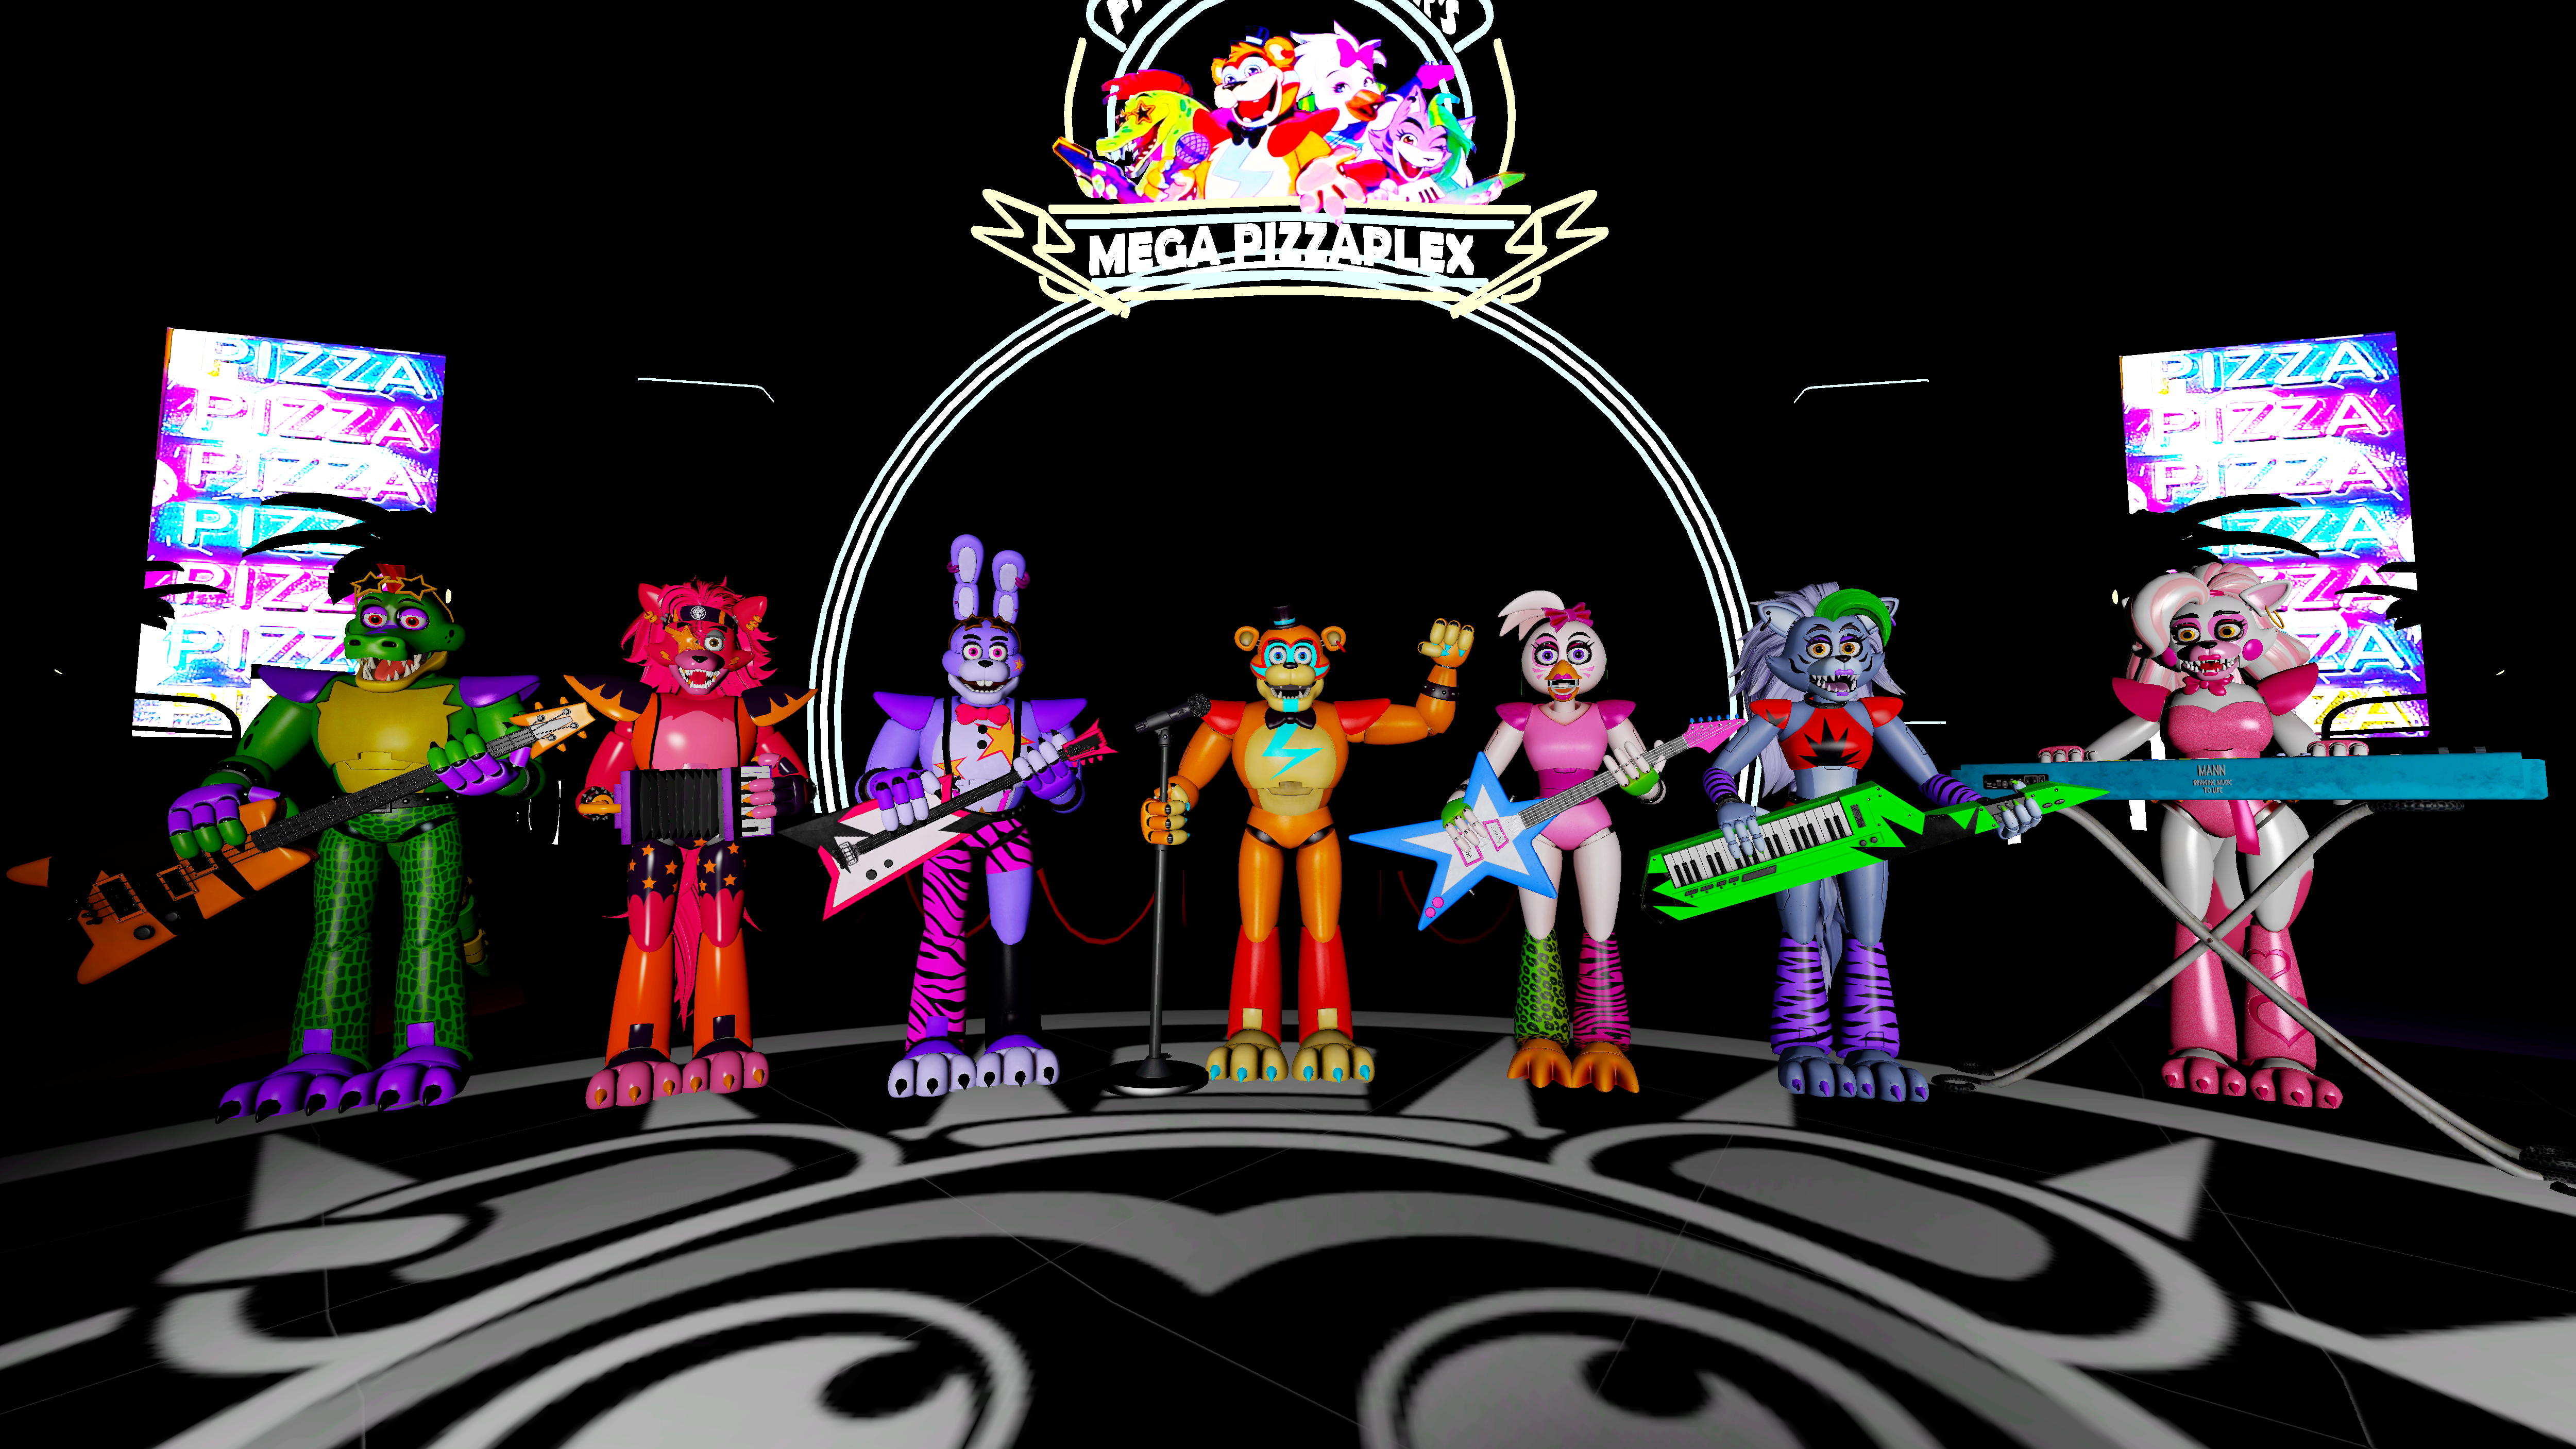 Five Nights at Freddy's Security Breach - All Cast by Vyprae on DeviantArt